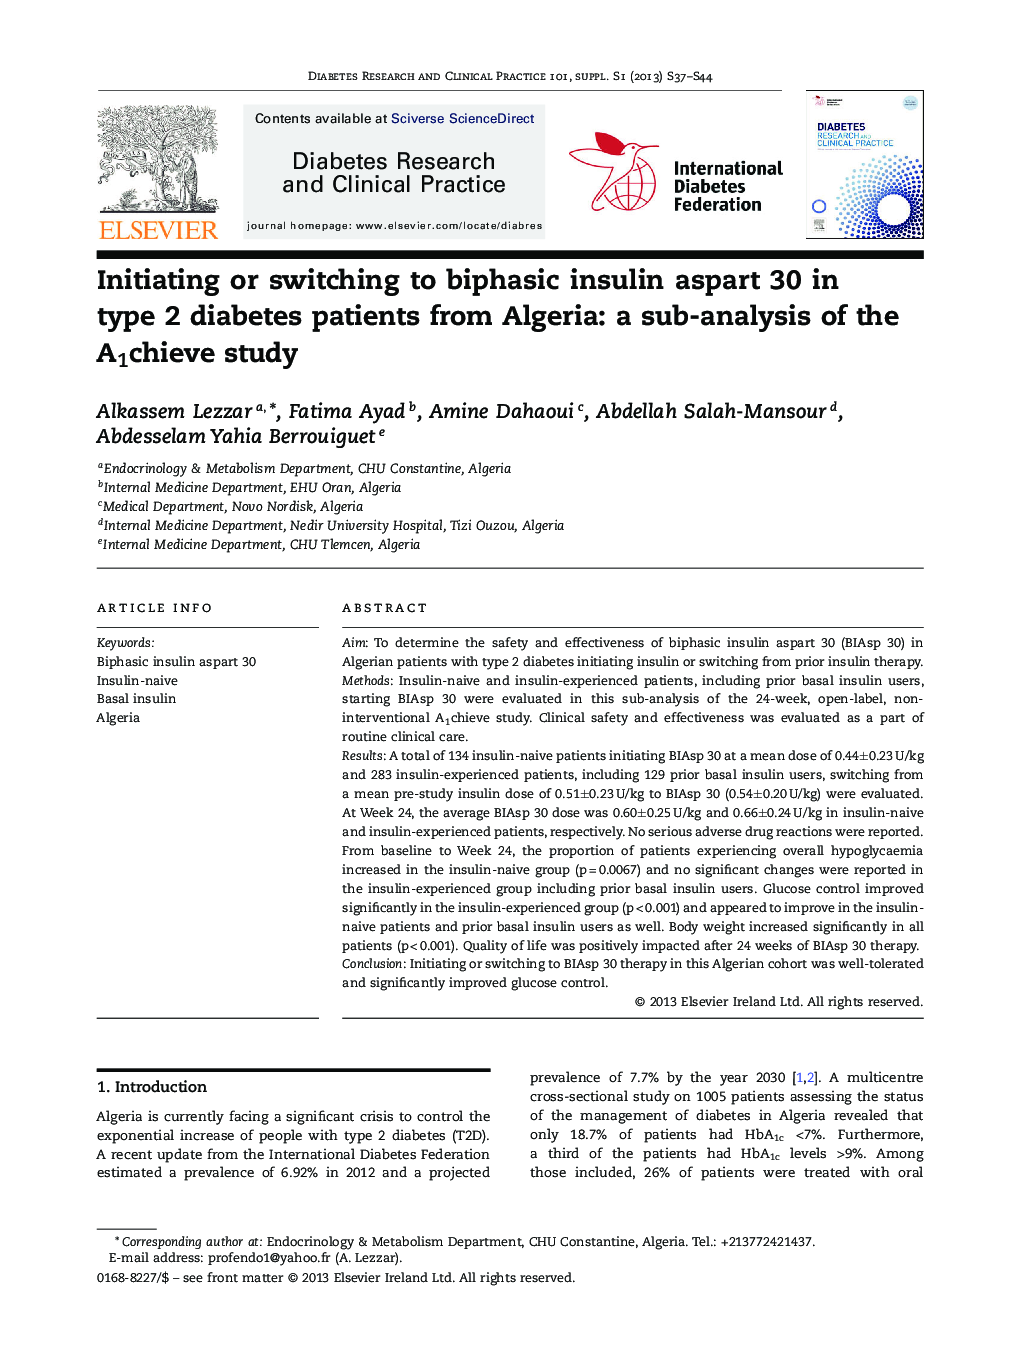 Initiating or switching to biphasic insulin aspart 30 in type 2 diabetes patients from Algeria: a sub-analysis of the A1chieve study